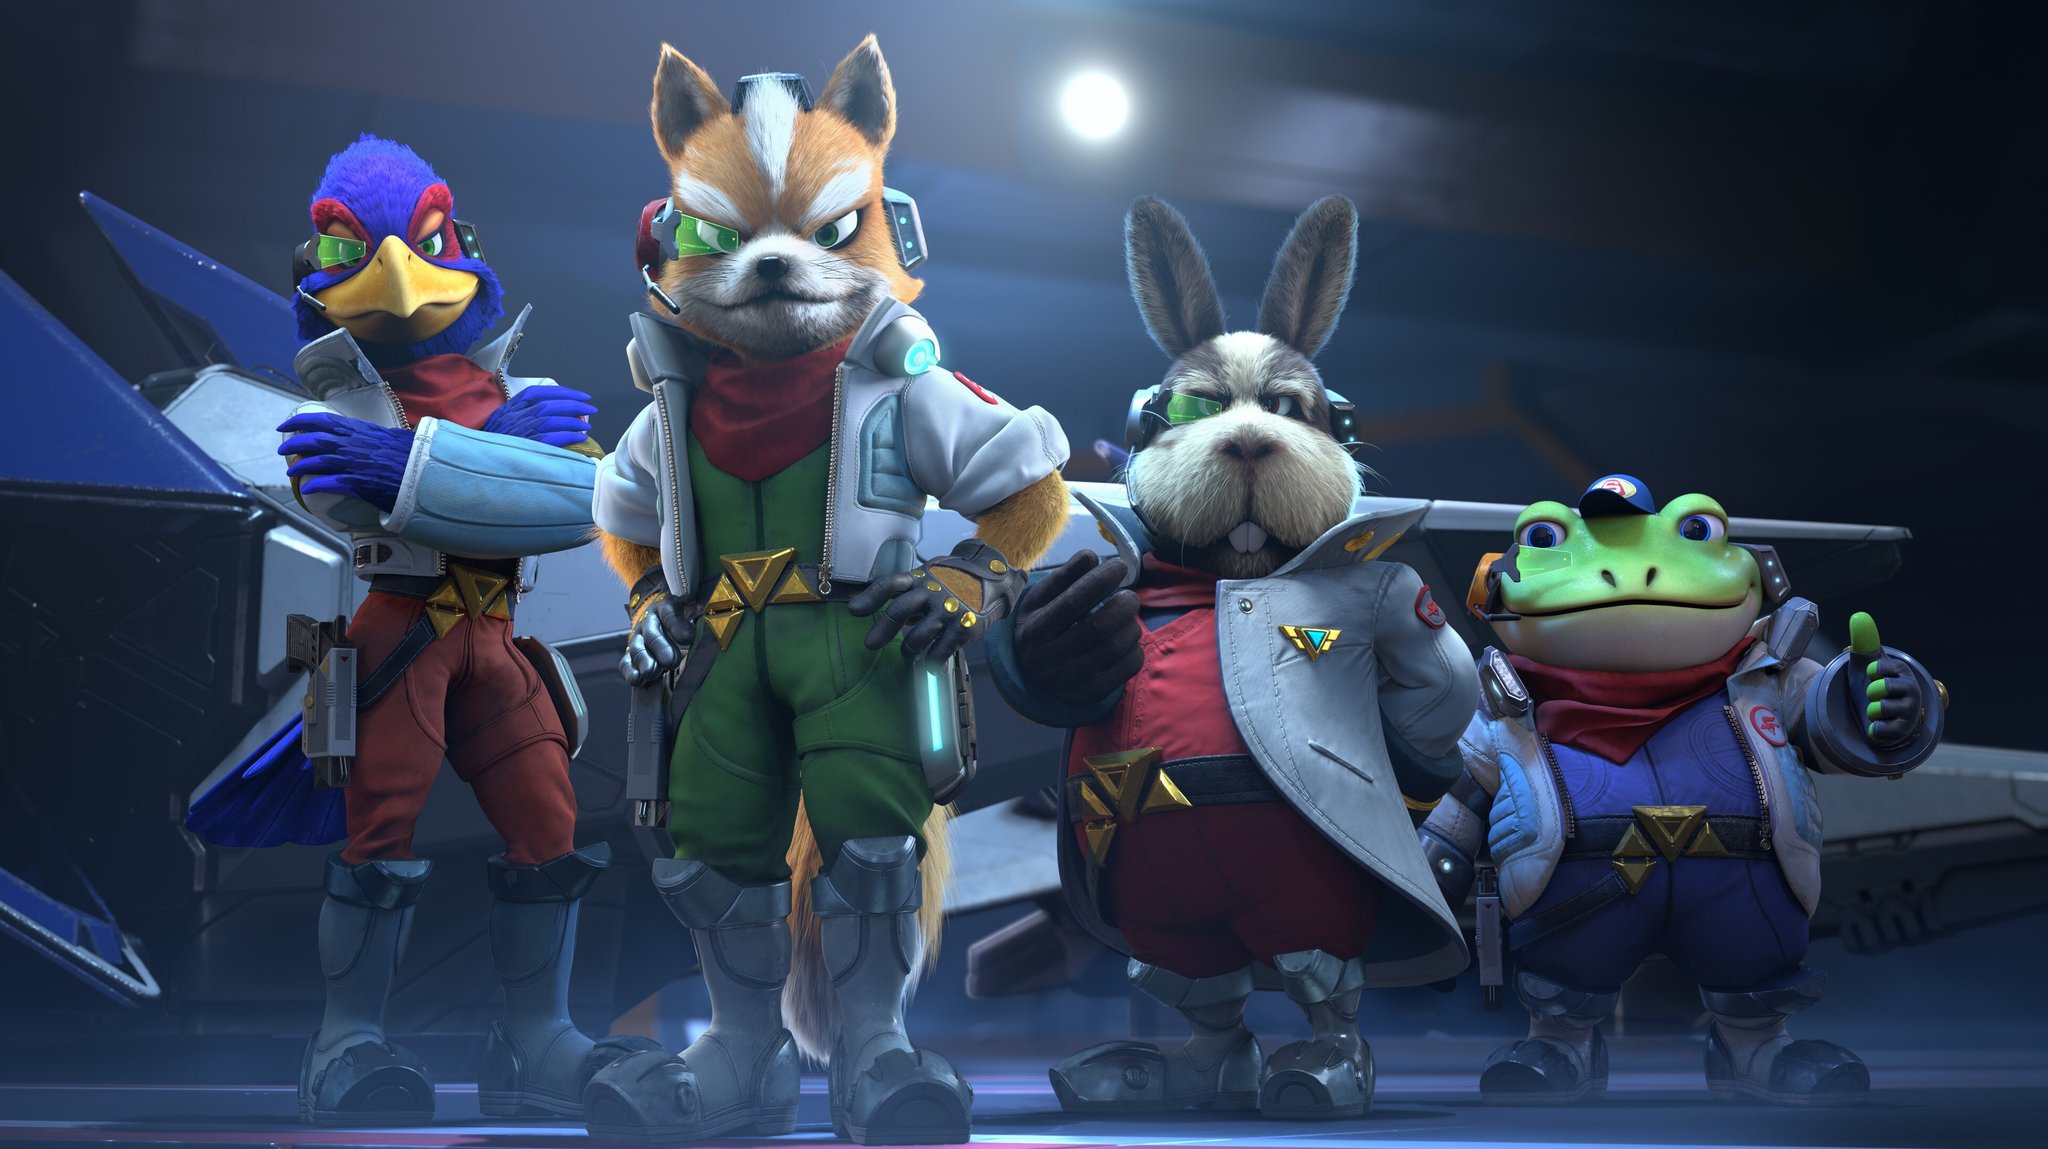 Star Fox Pics on Twitter: "I just wanted to come back and say that I l...